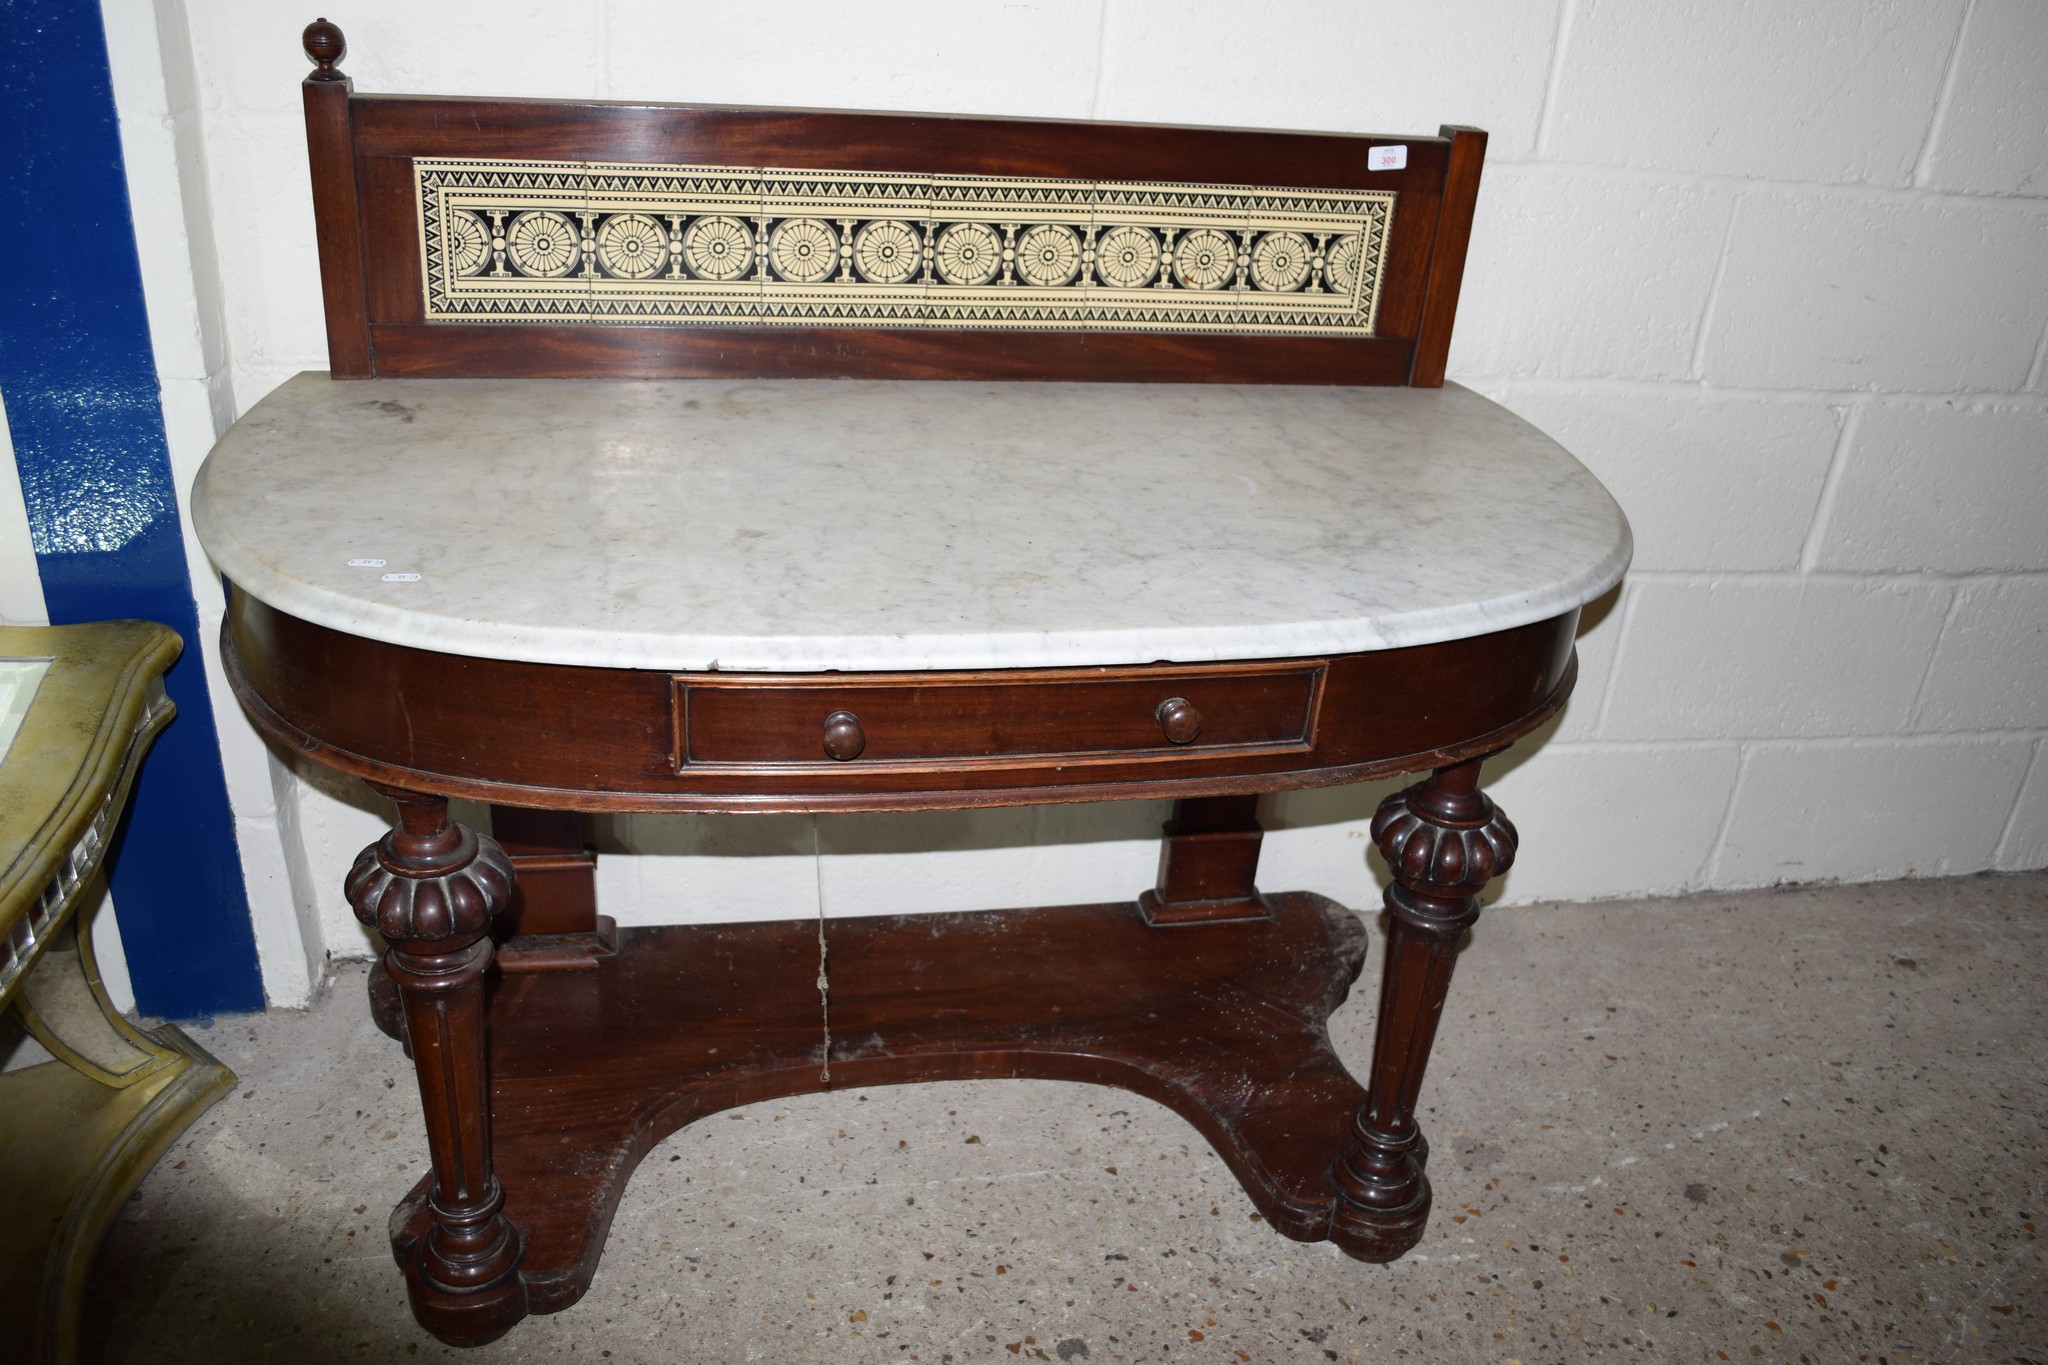 19TH CENTURY TILE BACK MARBLE TOP WASH STAND WITH ORNATELY CARVED LEGS, WIDTH APPROX 123CM MAX